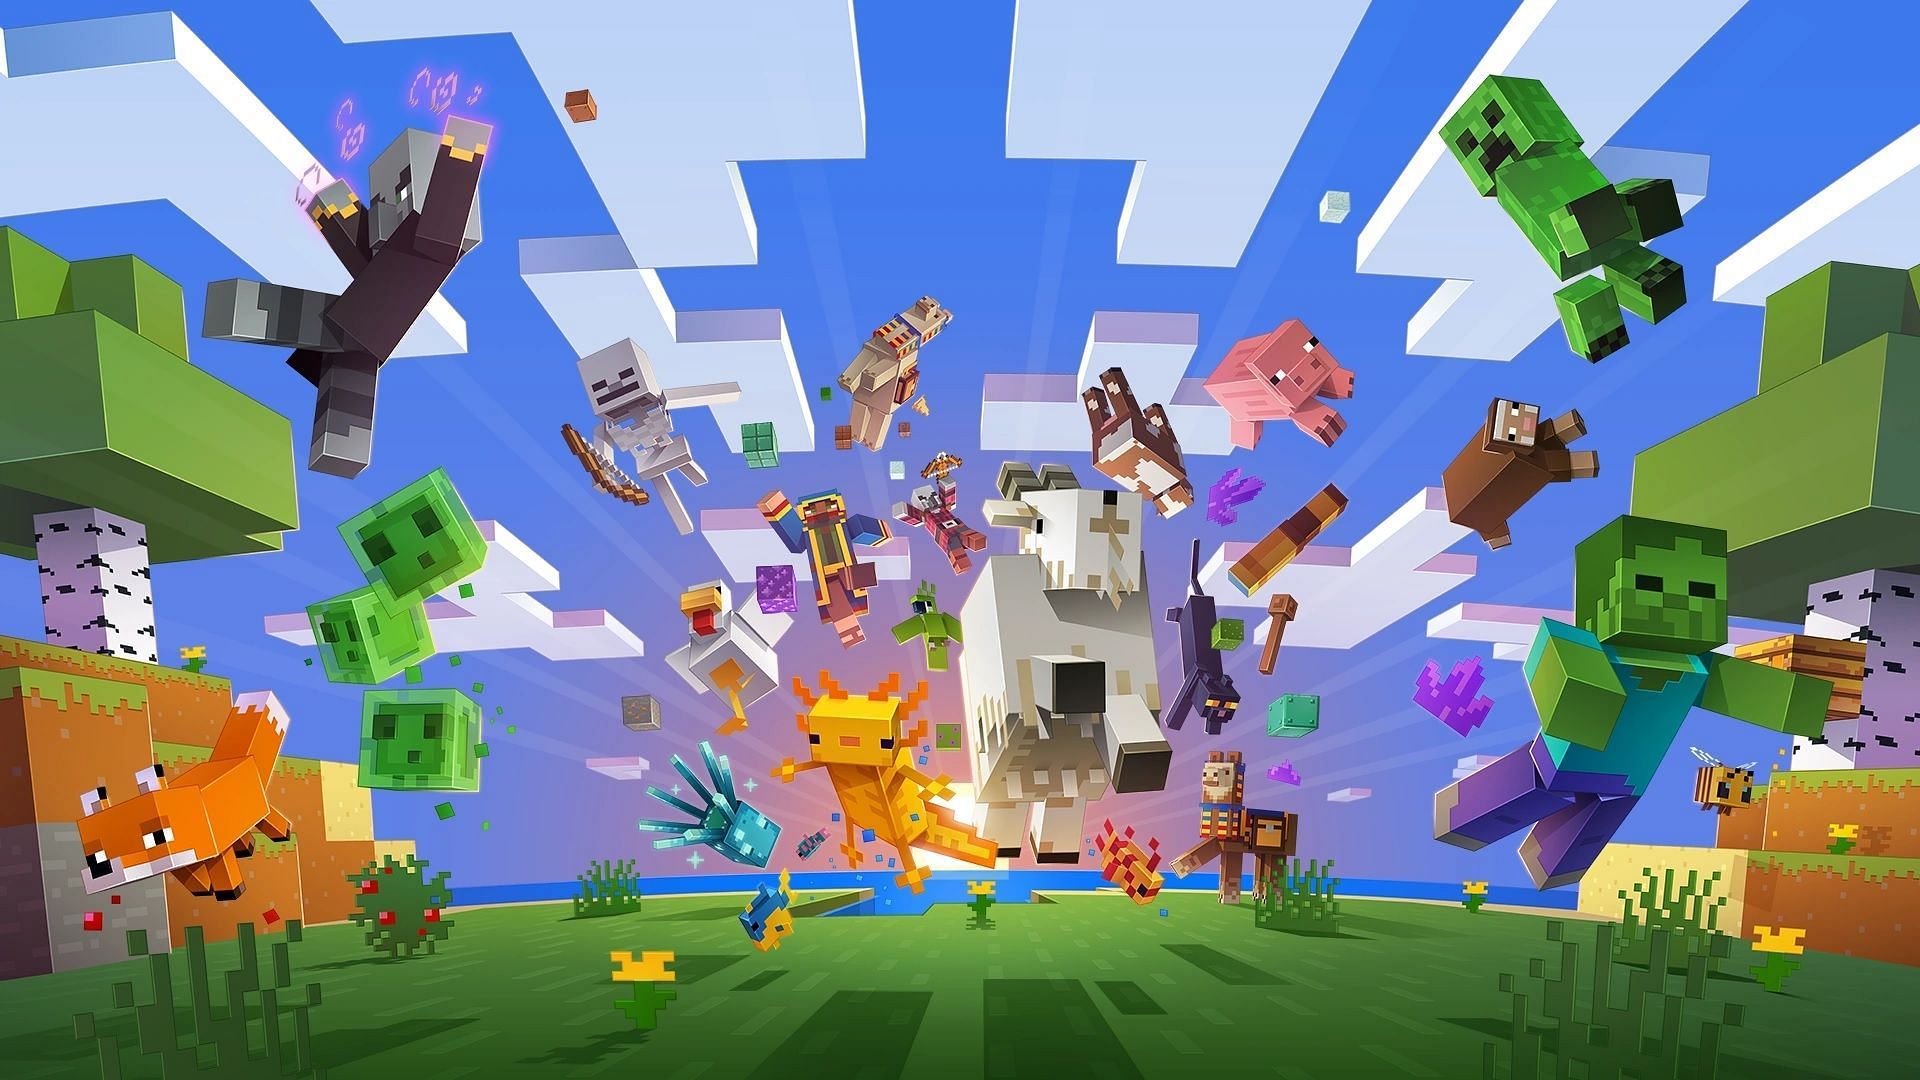 Minecraft Now: Start date, time, and everything announced so far